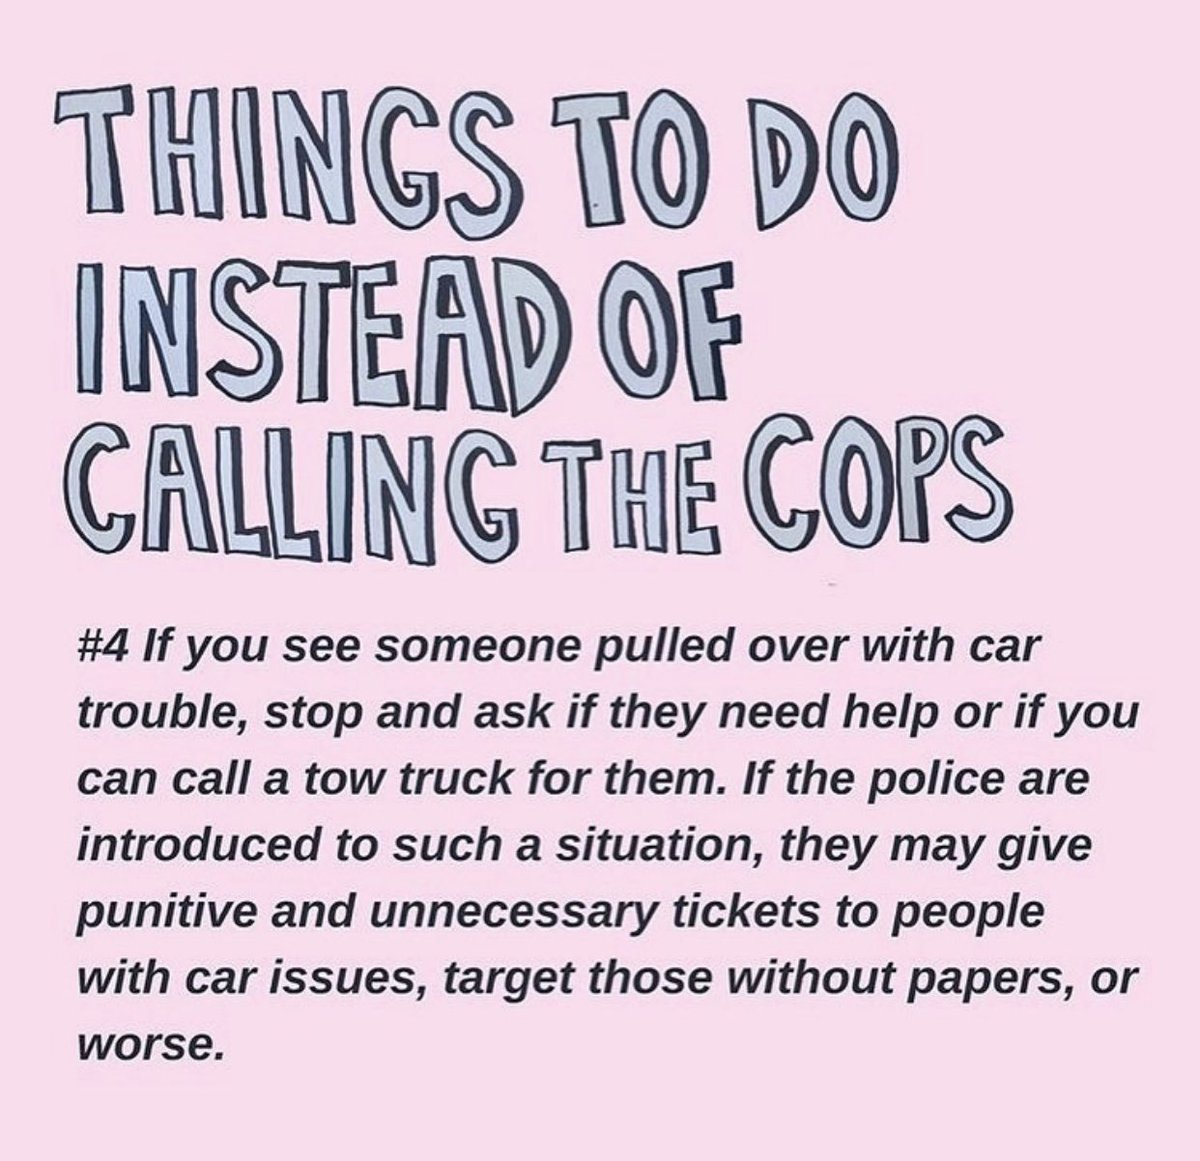 inserting the police in a situation is clearly putting lives at risk. here are alternatives via @ tapicoa_starch on IG